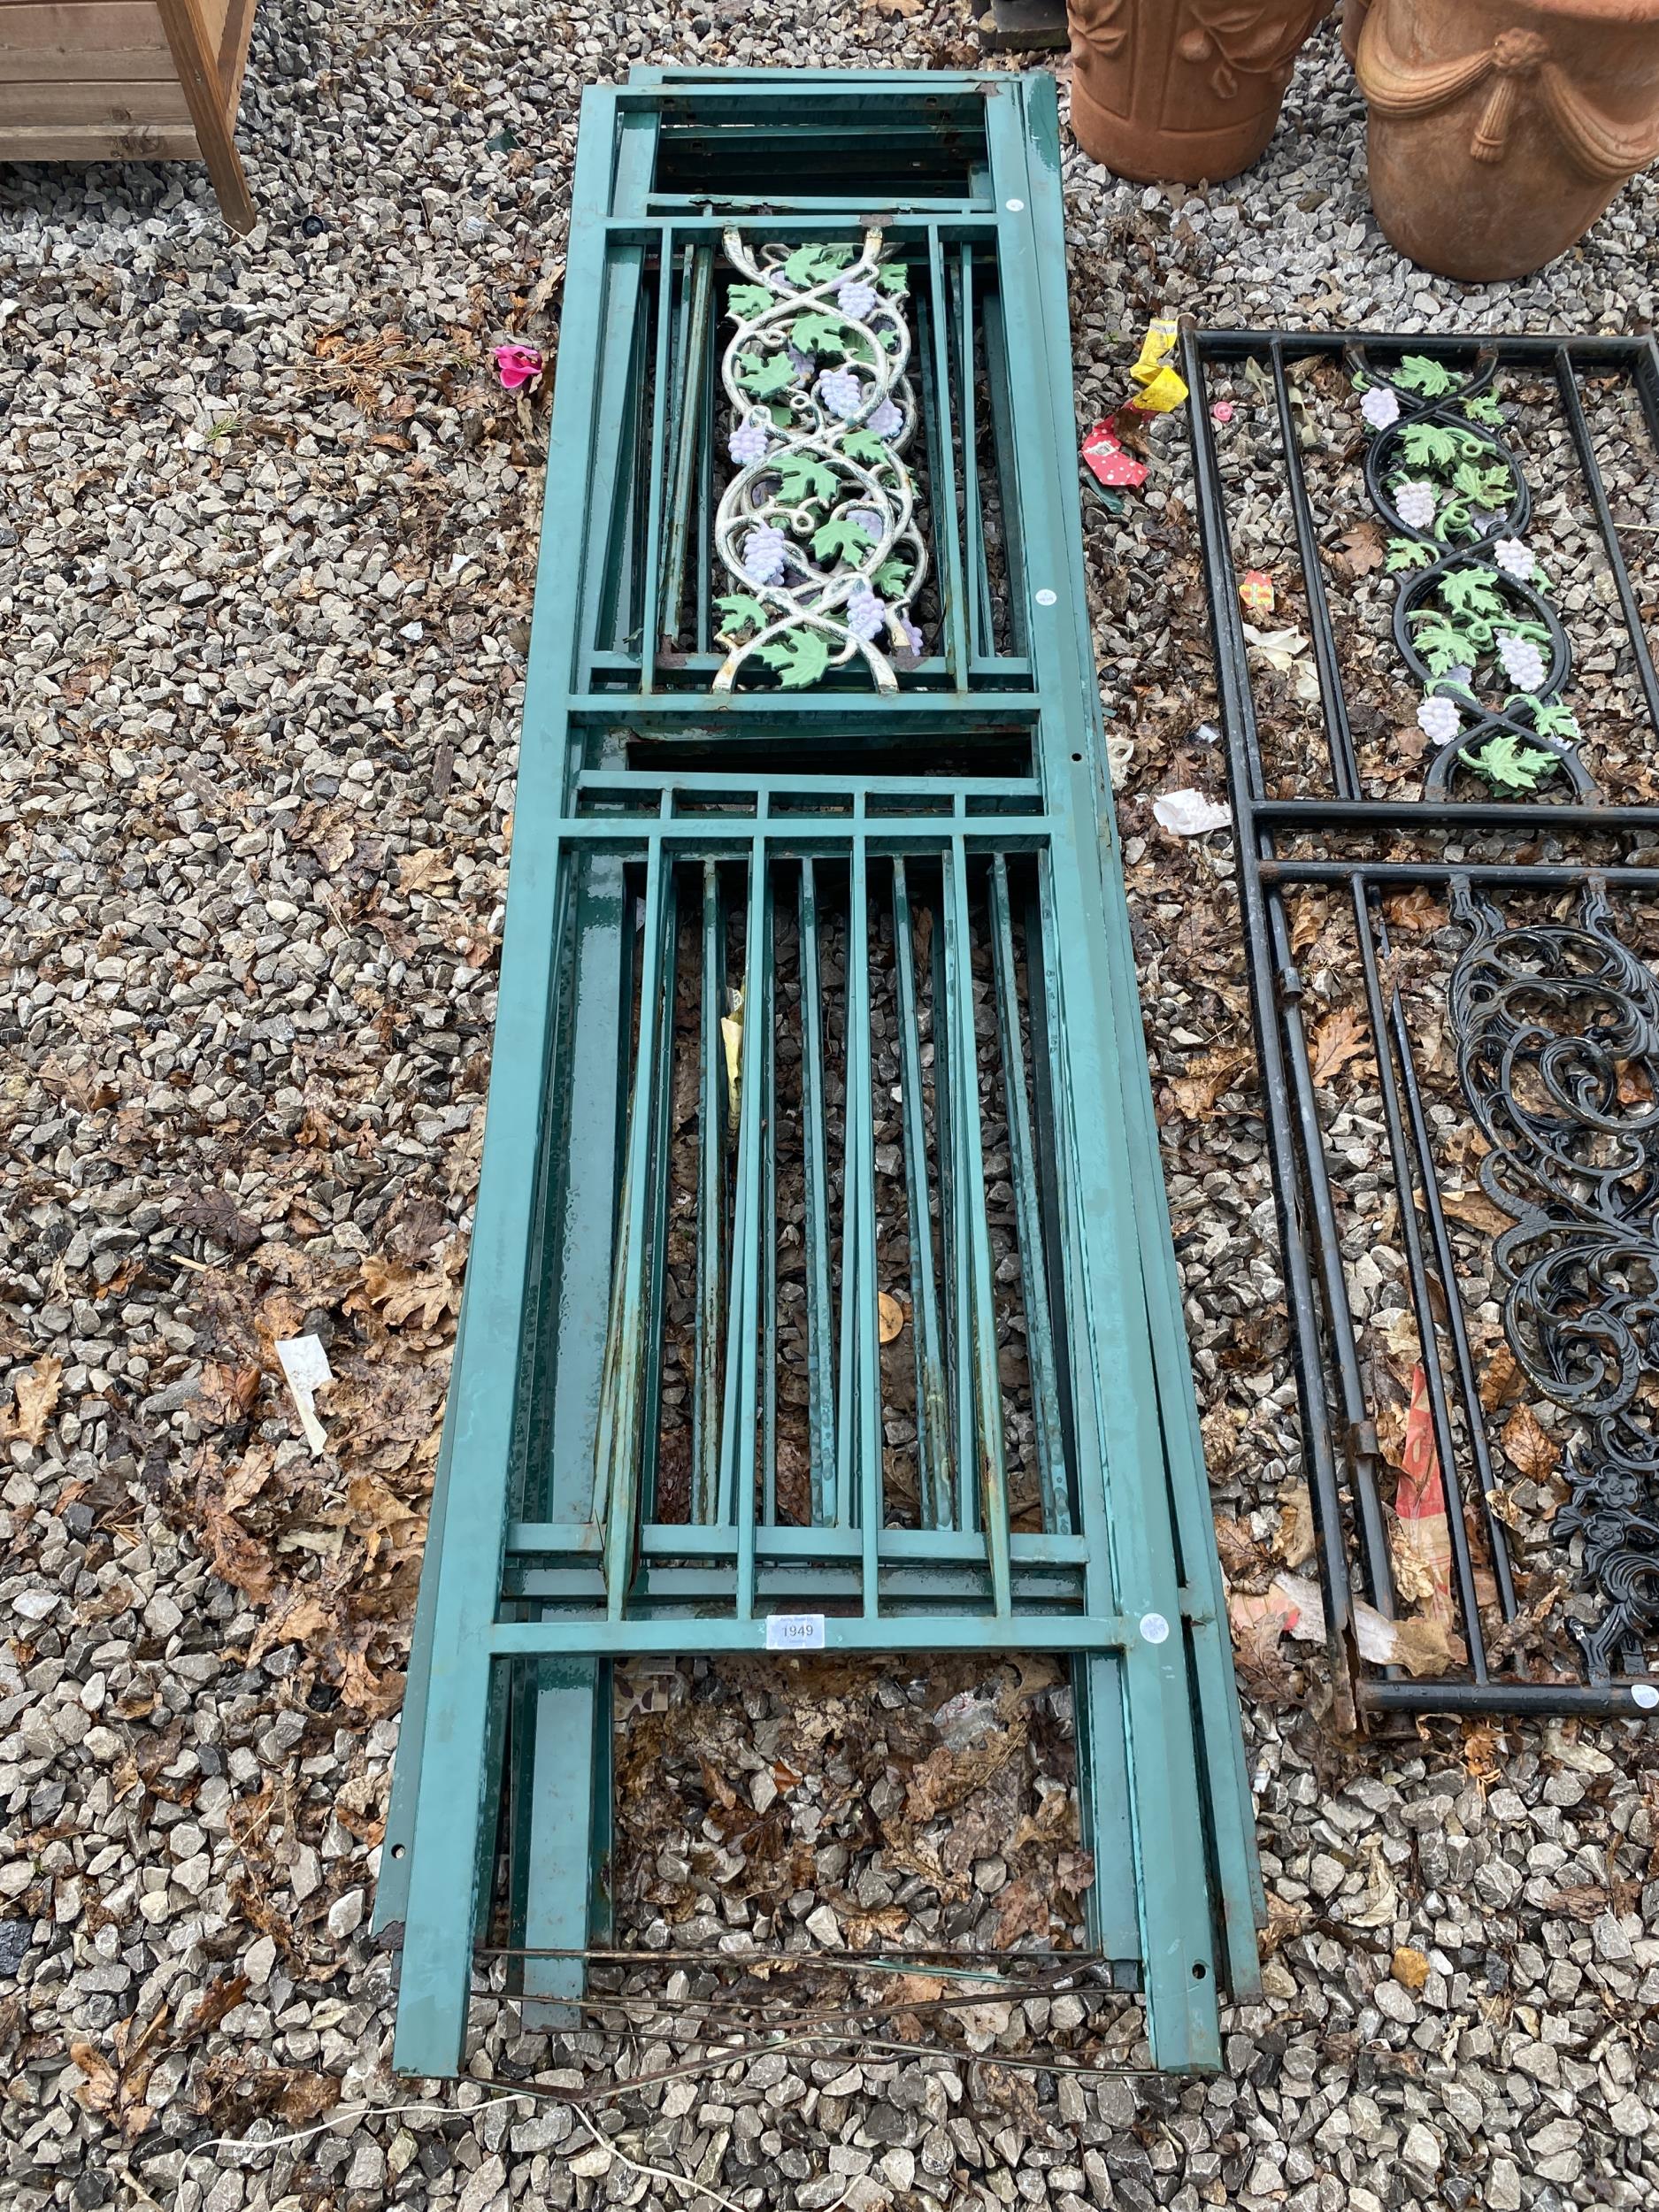 EIGHT SECTIONS OF ORNATE METAL FENCING (H-198CM)